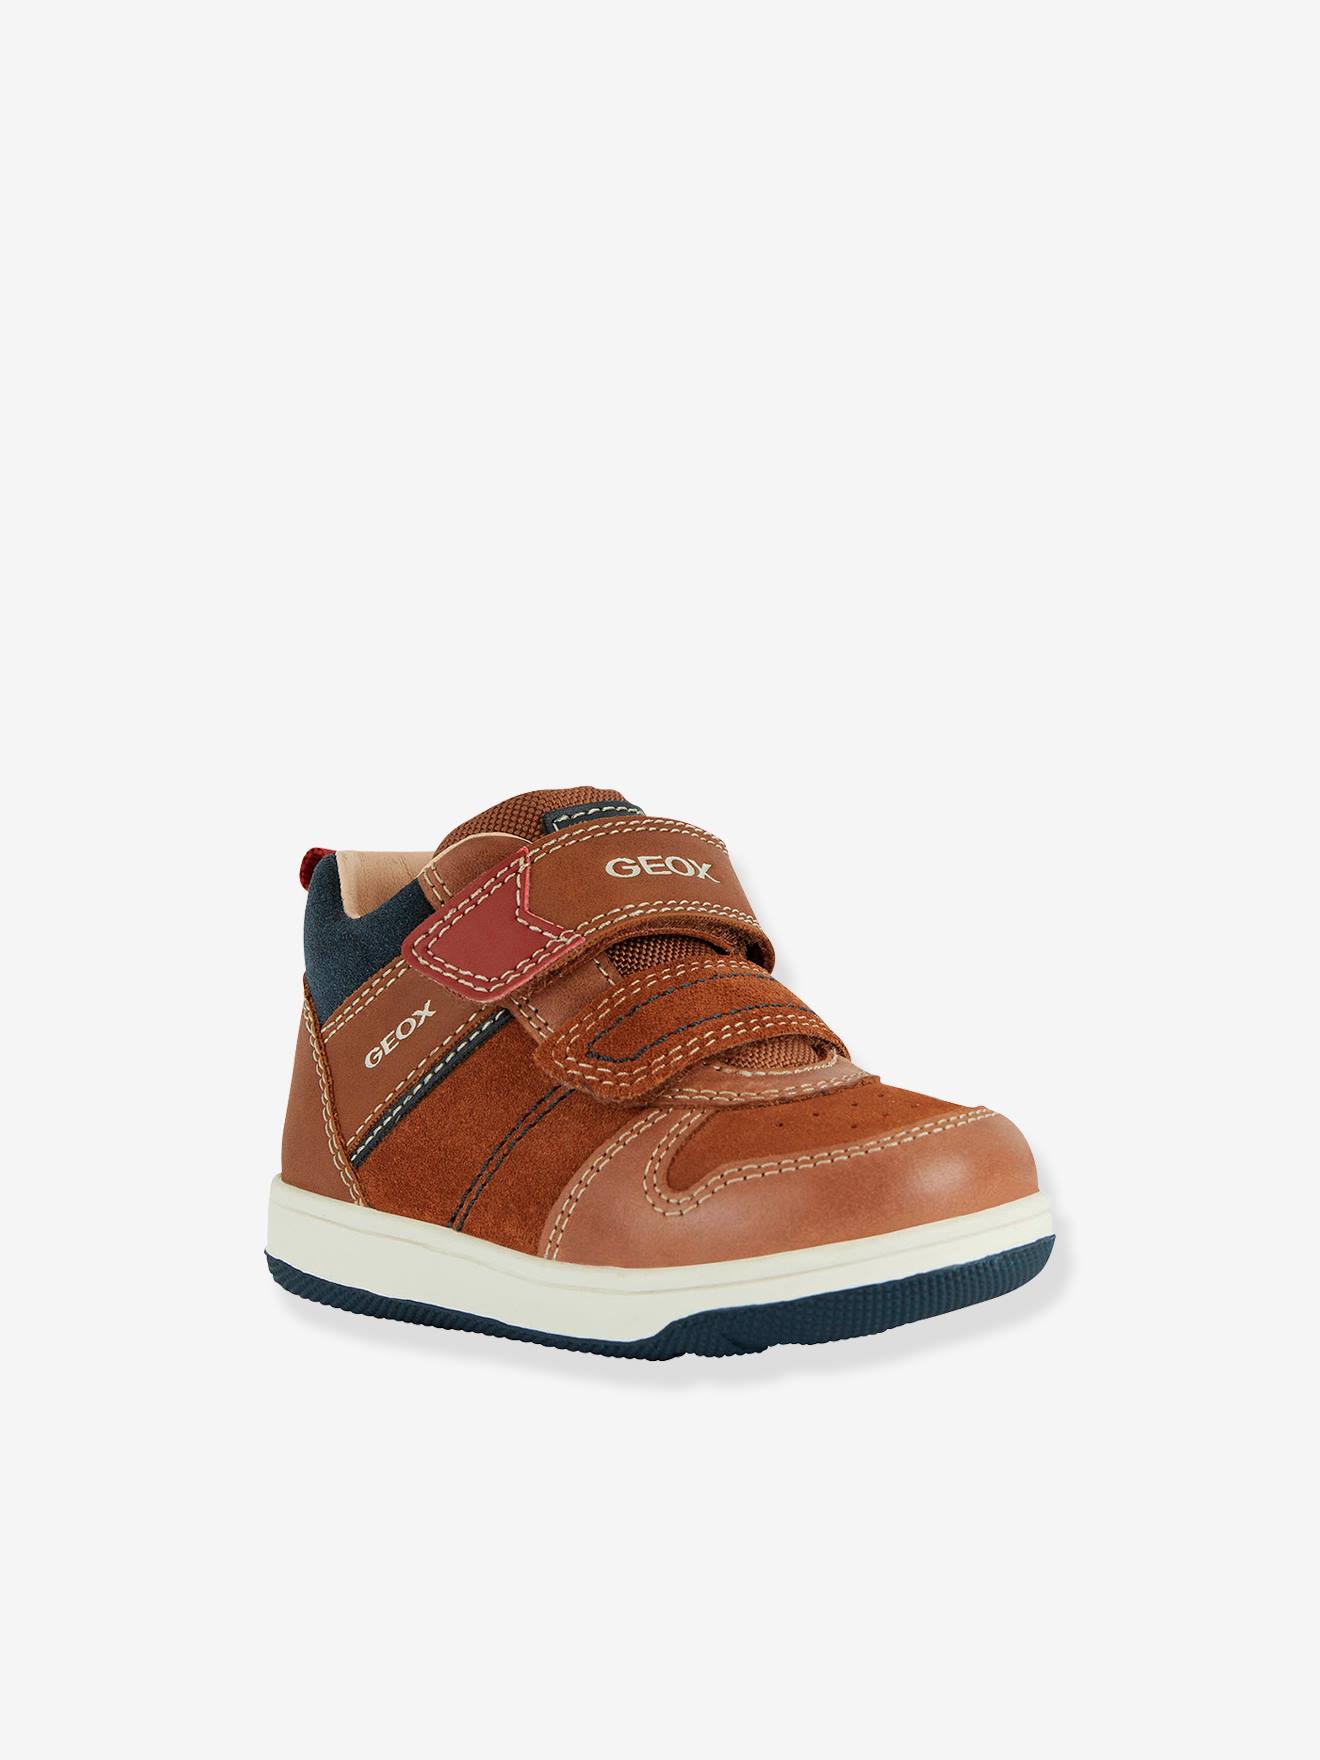 High Top Trainers for Baby, New Boy by GEOX®, Shoes